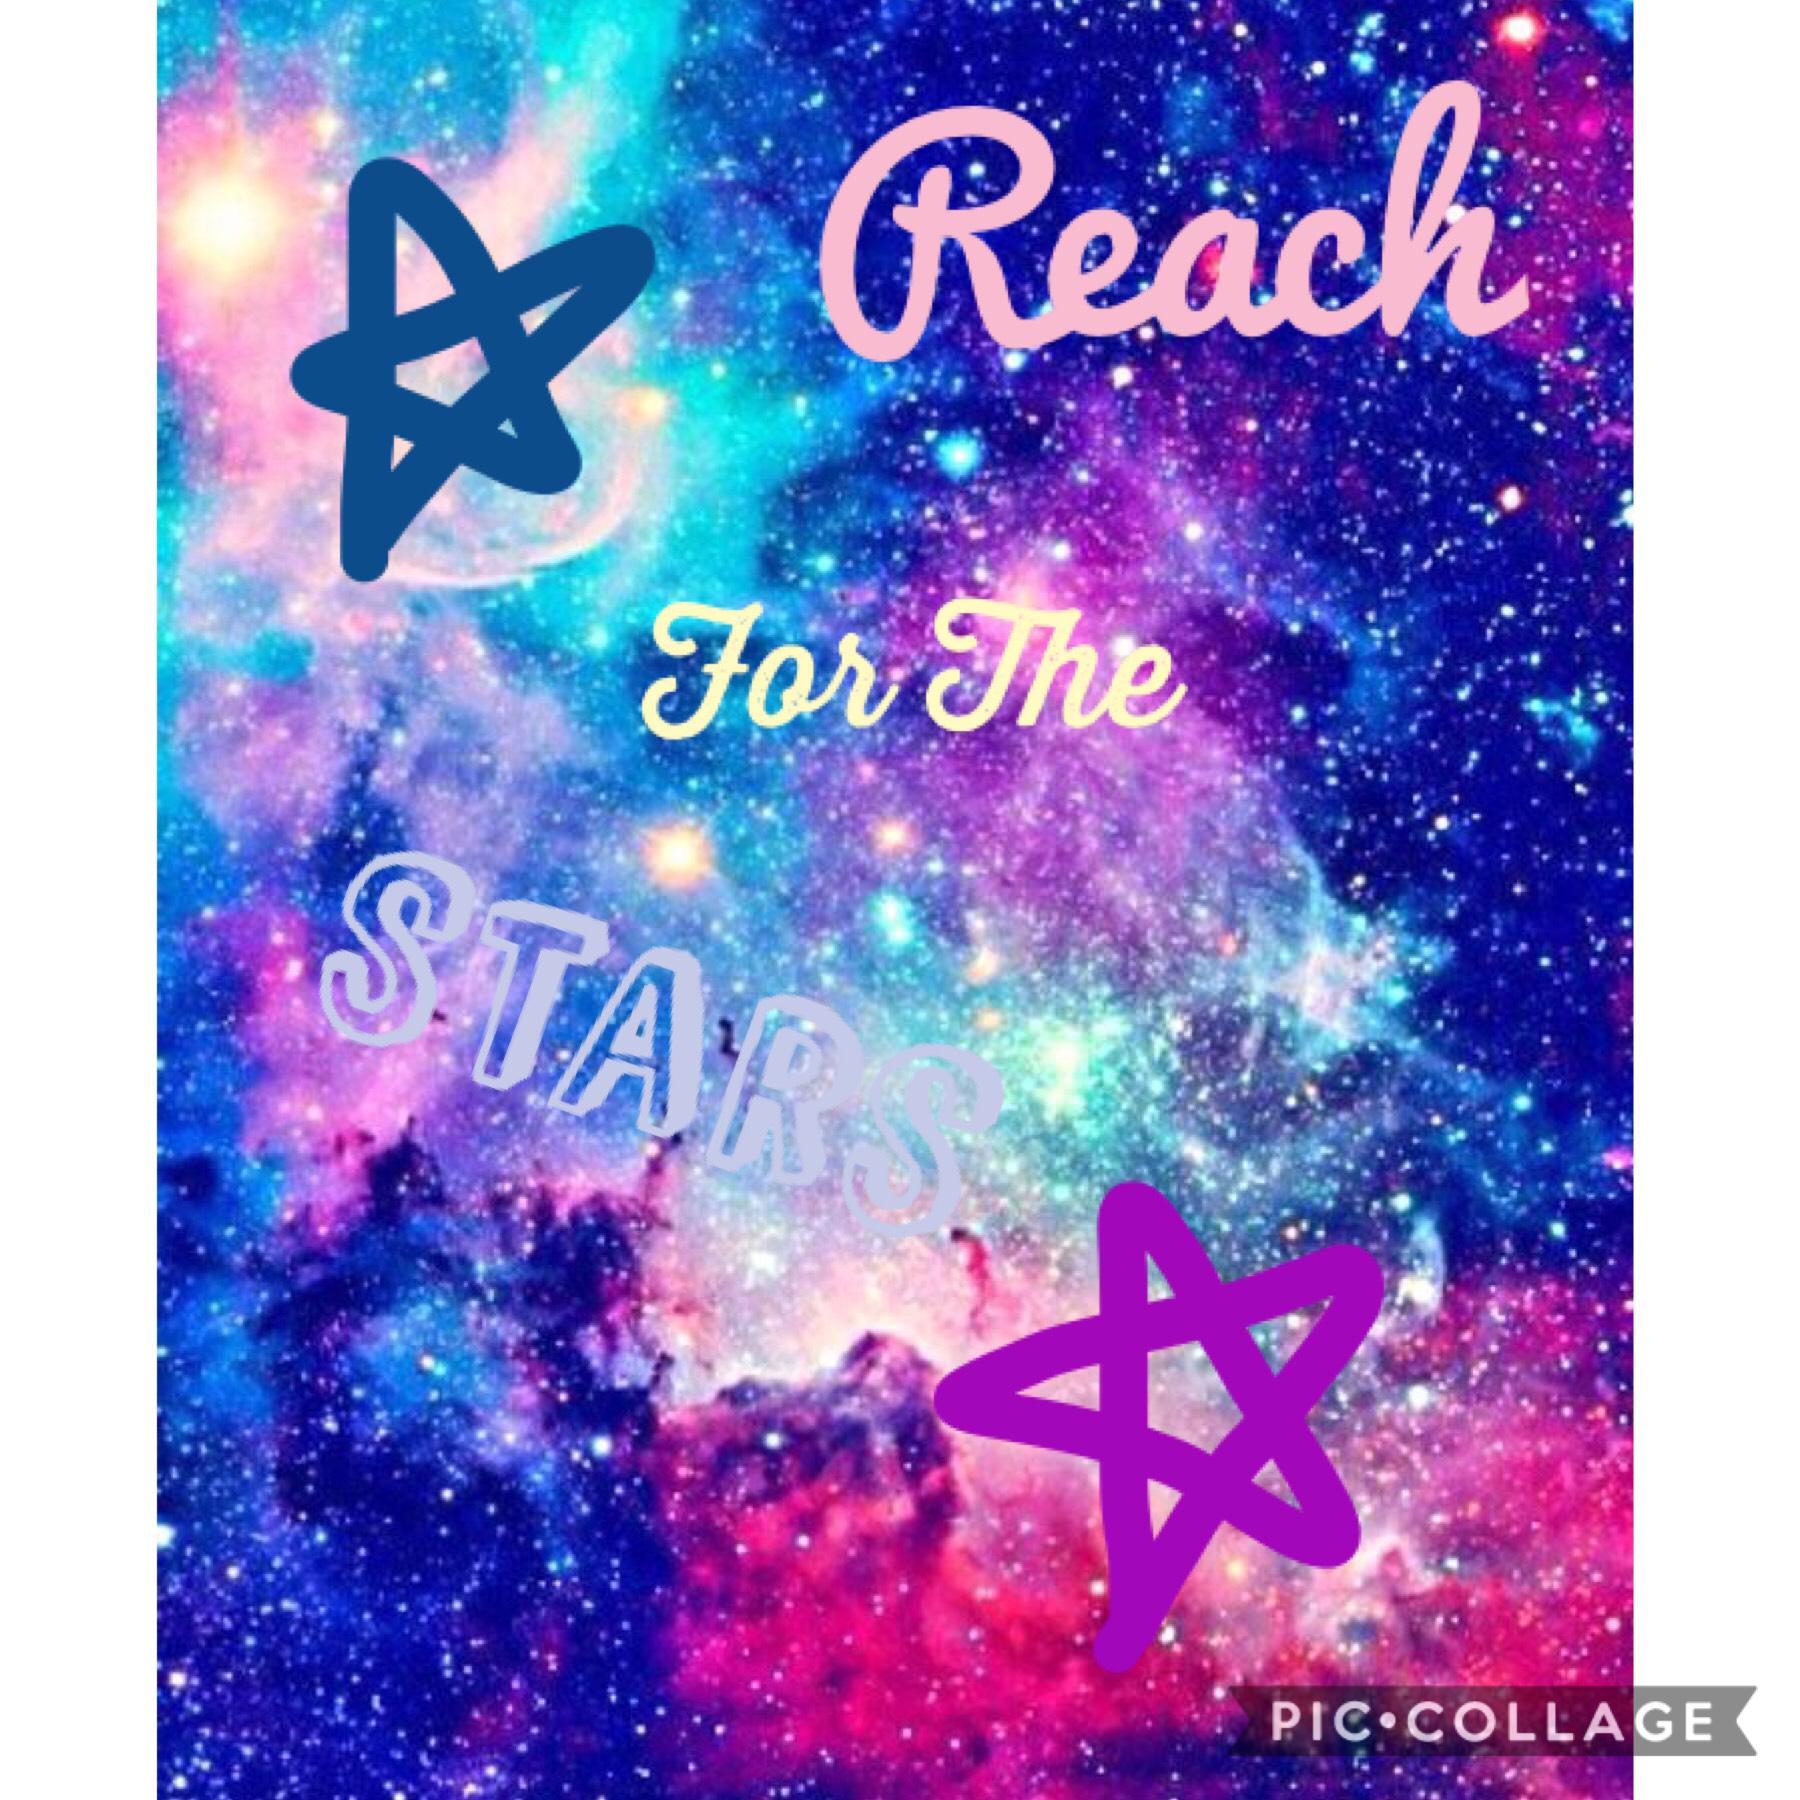 Reach For The Stars